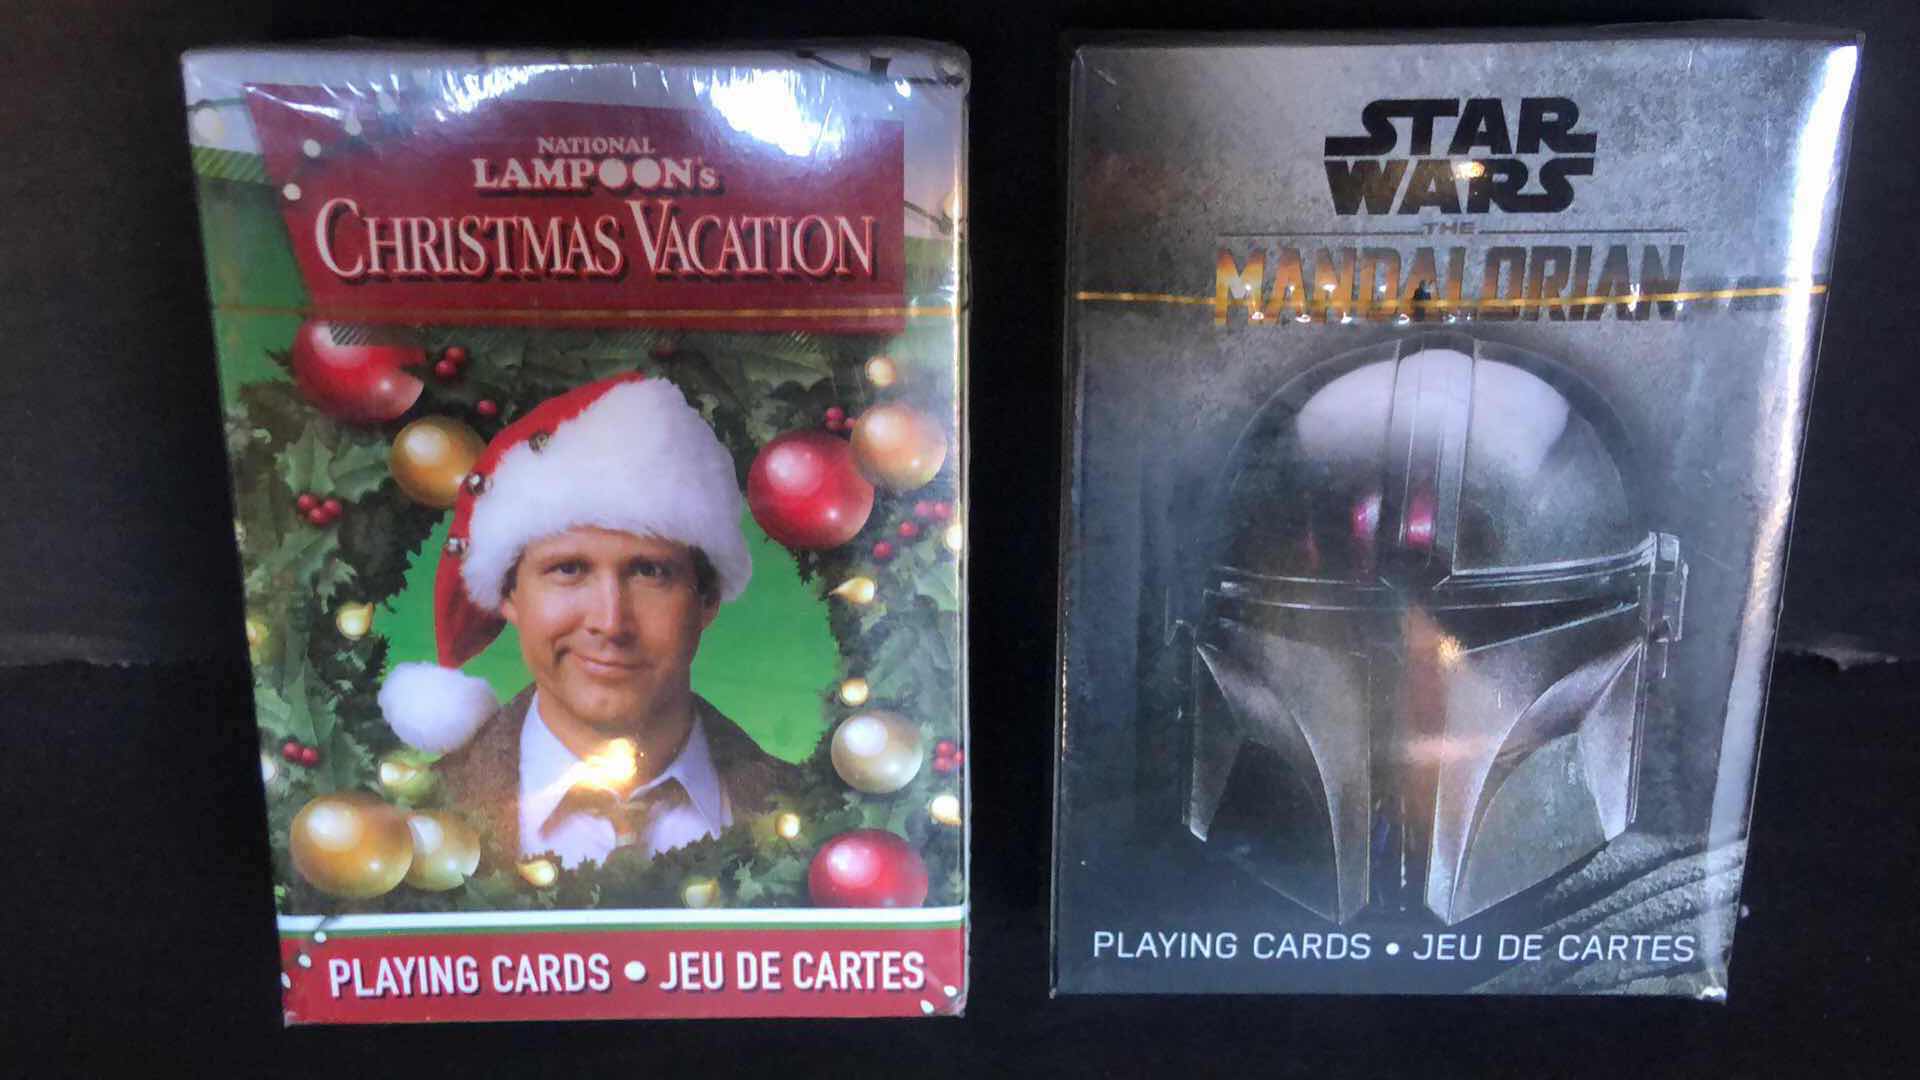 Photo 1 of STAR WARS MANDALORIAN AND NATIONAL LAMPOONS CHRISTMAS VACATION PLAYING CARDS (2)